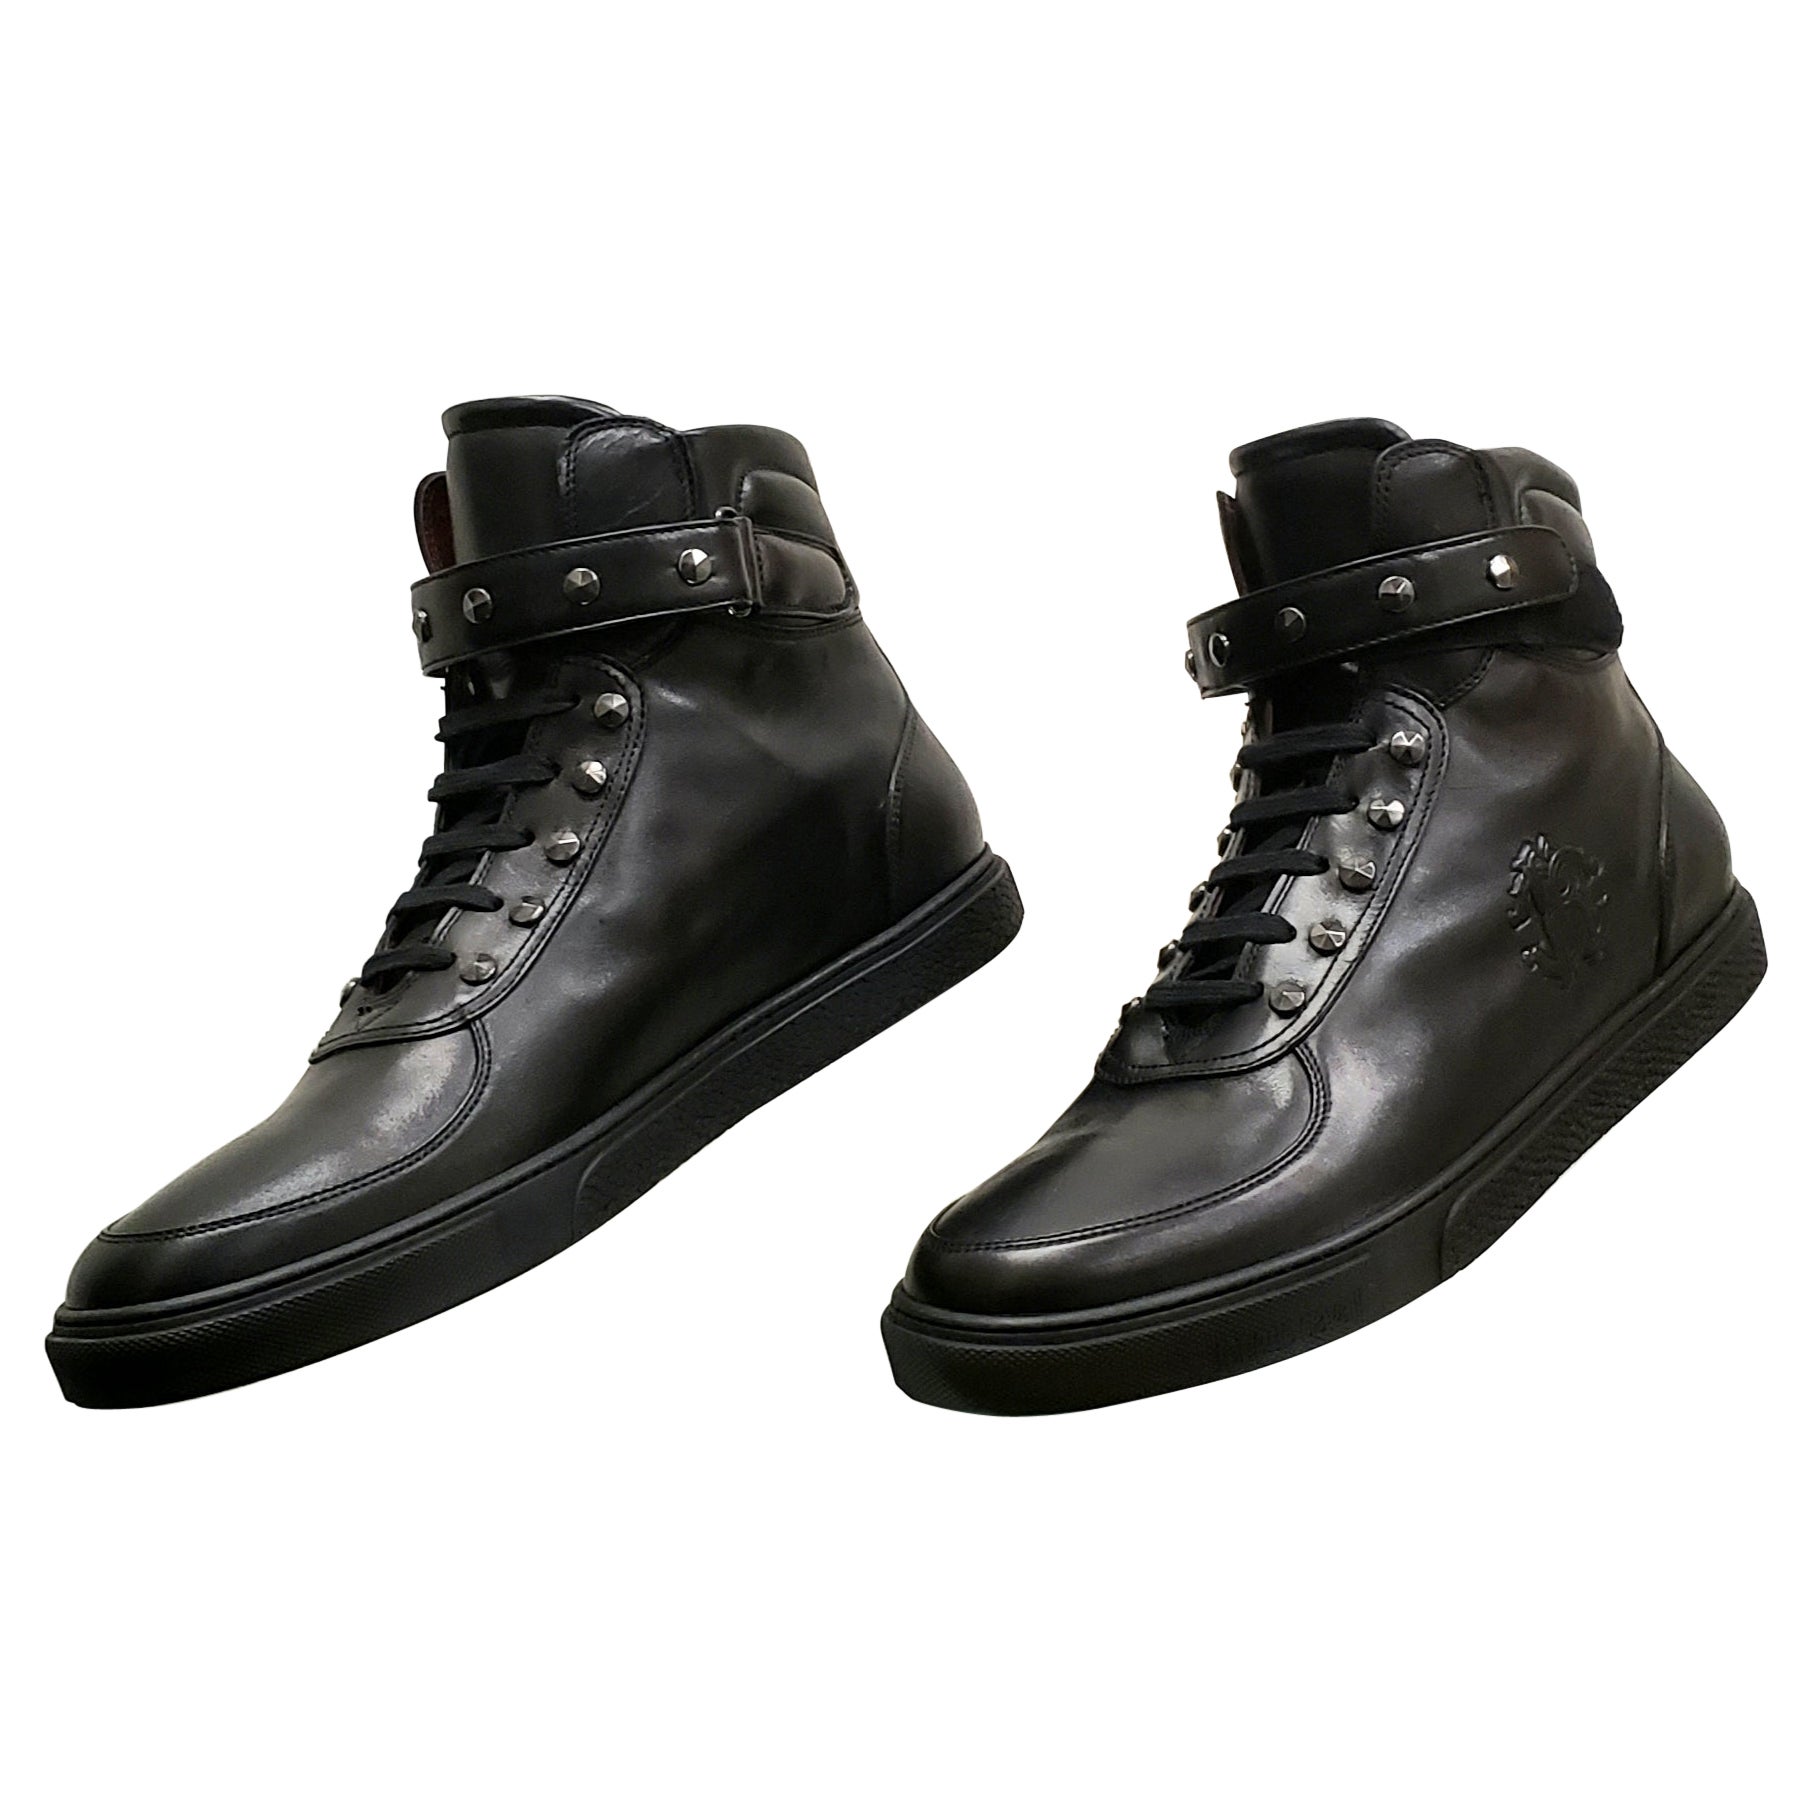 New ROBERTO CAVALLI BLACK LEATHER STUDDED HIGH TOP SNEAKERS 44.5 - 11.5